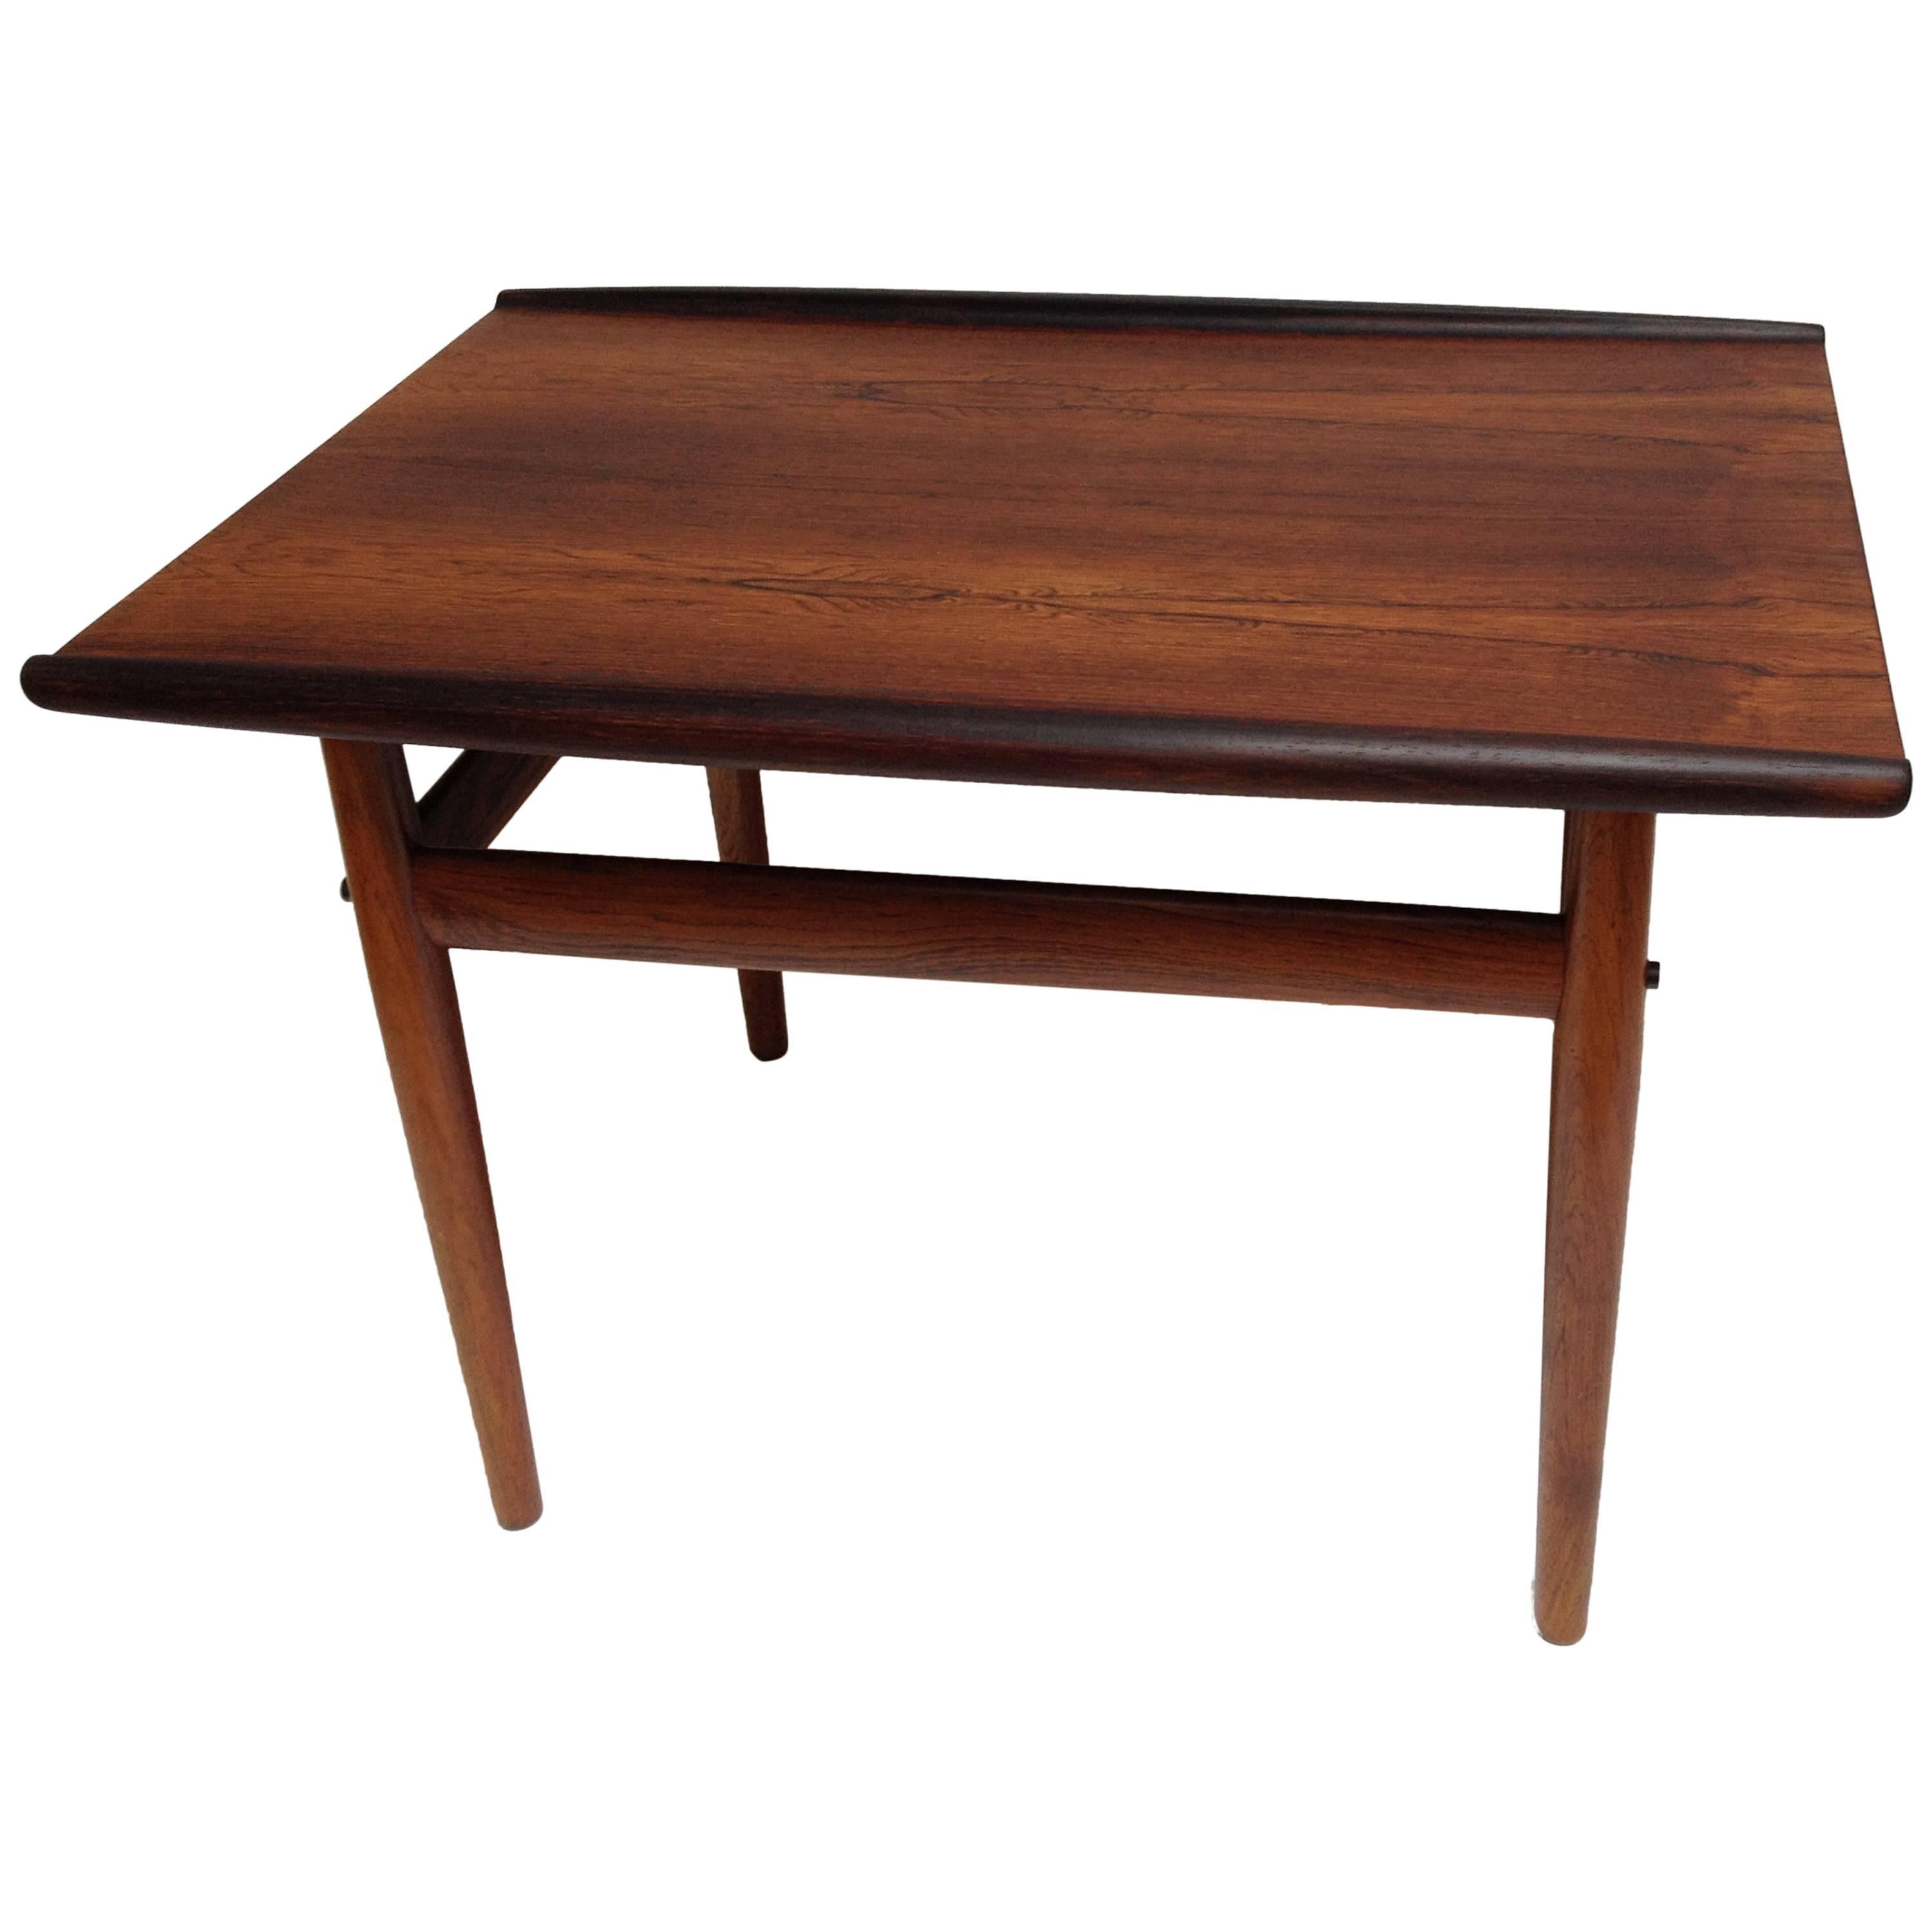 Gorgeous Midcentury Rosewood End Table Designed by Grete Jalk  For Sale